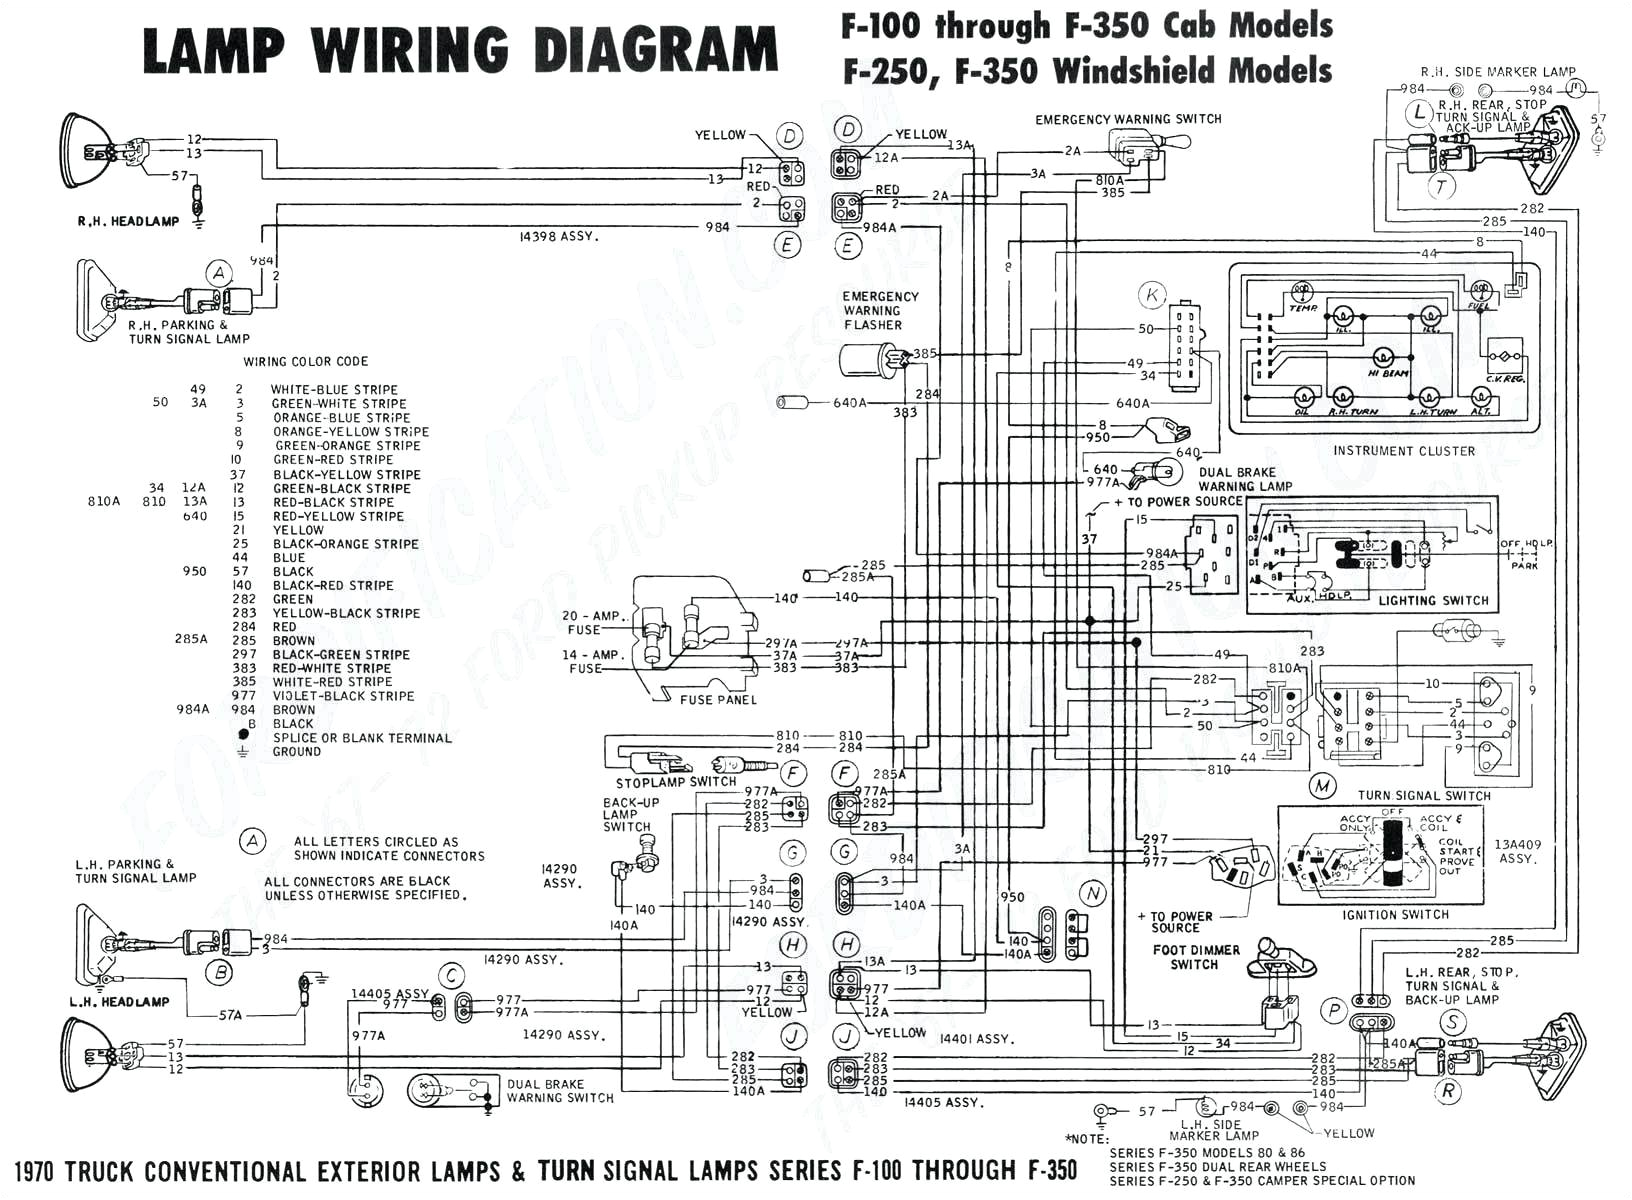 1986 ford f 250 sel wiring diagram wiring diagram schematic mix 1986 ford f 250 wiring